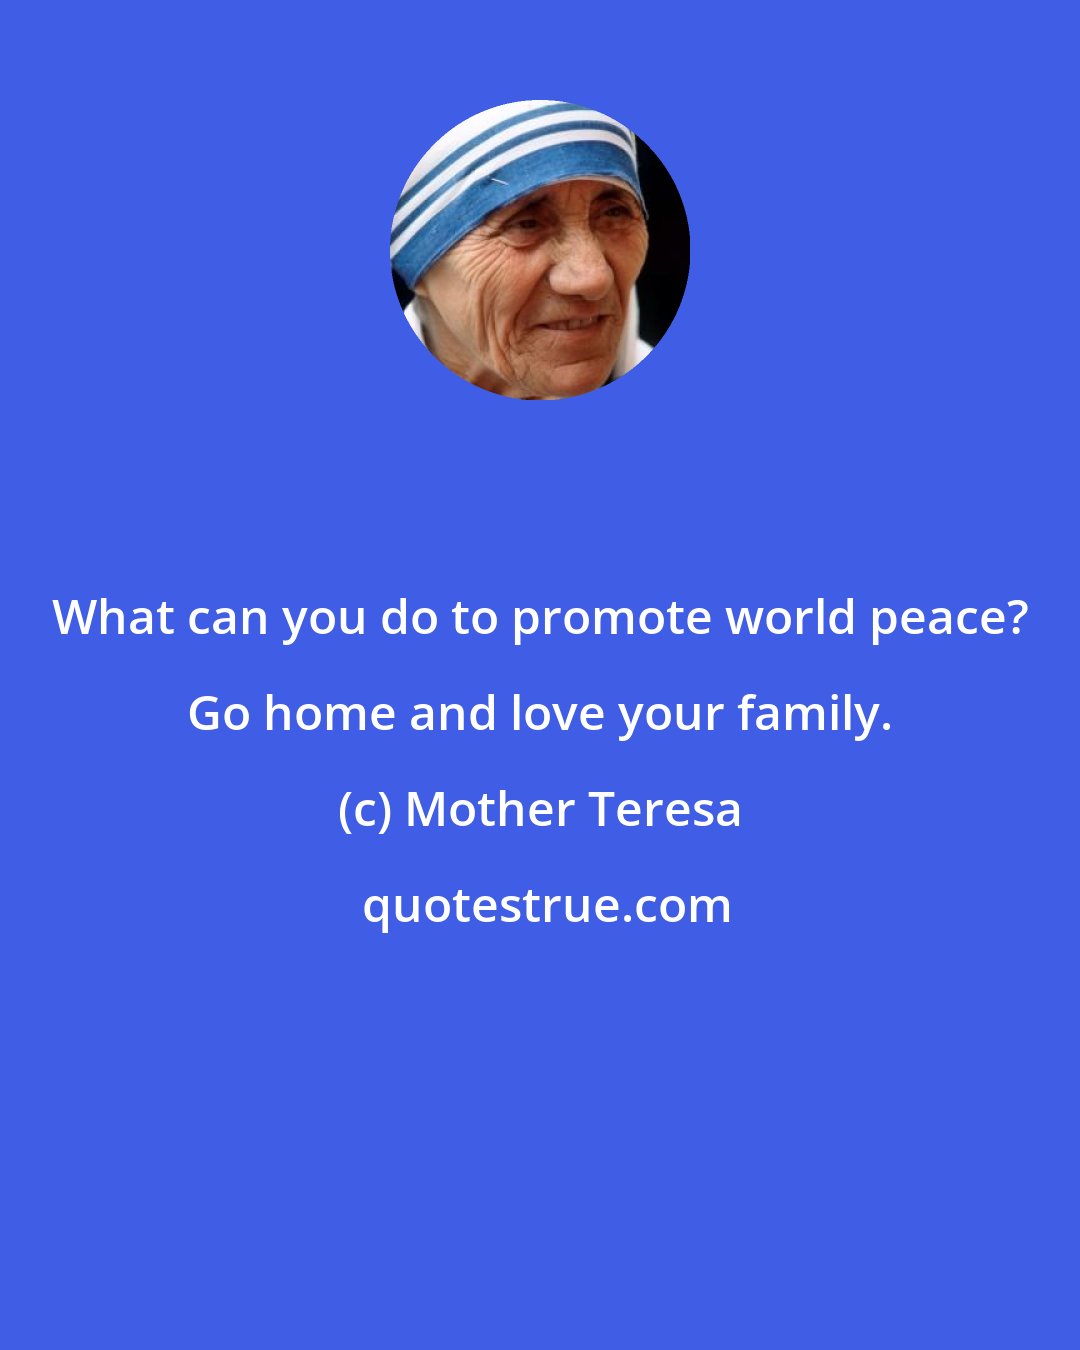 Mother Teresa: What can you do to promote world peace? Go home and love your family.